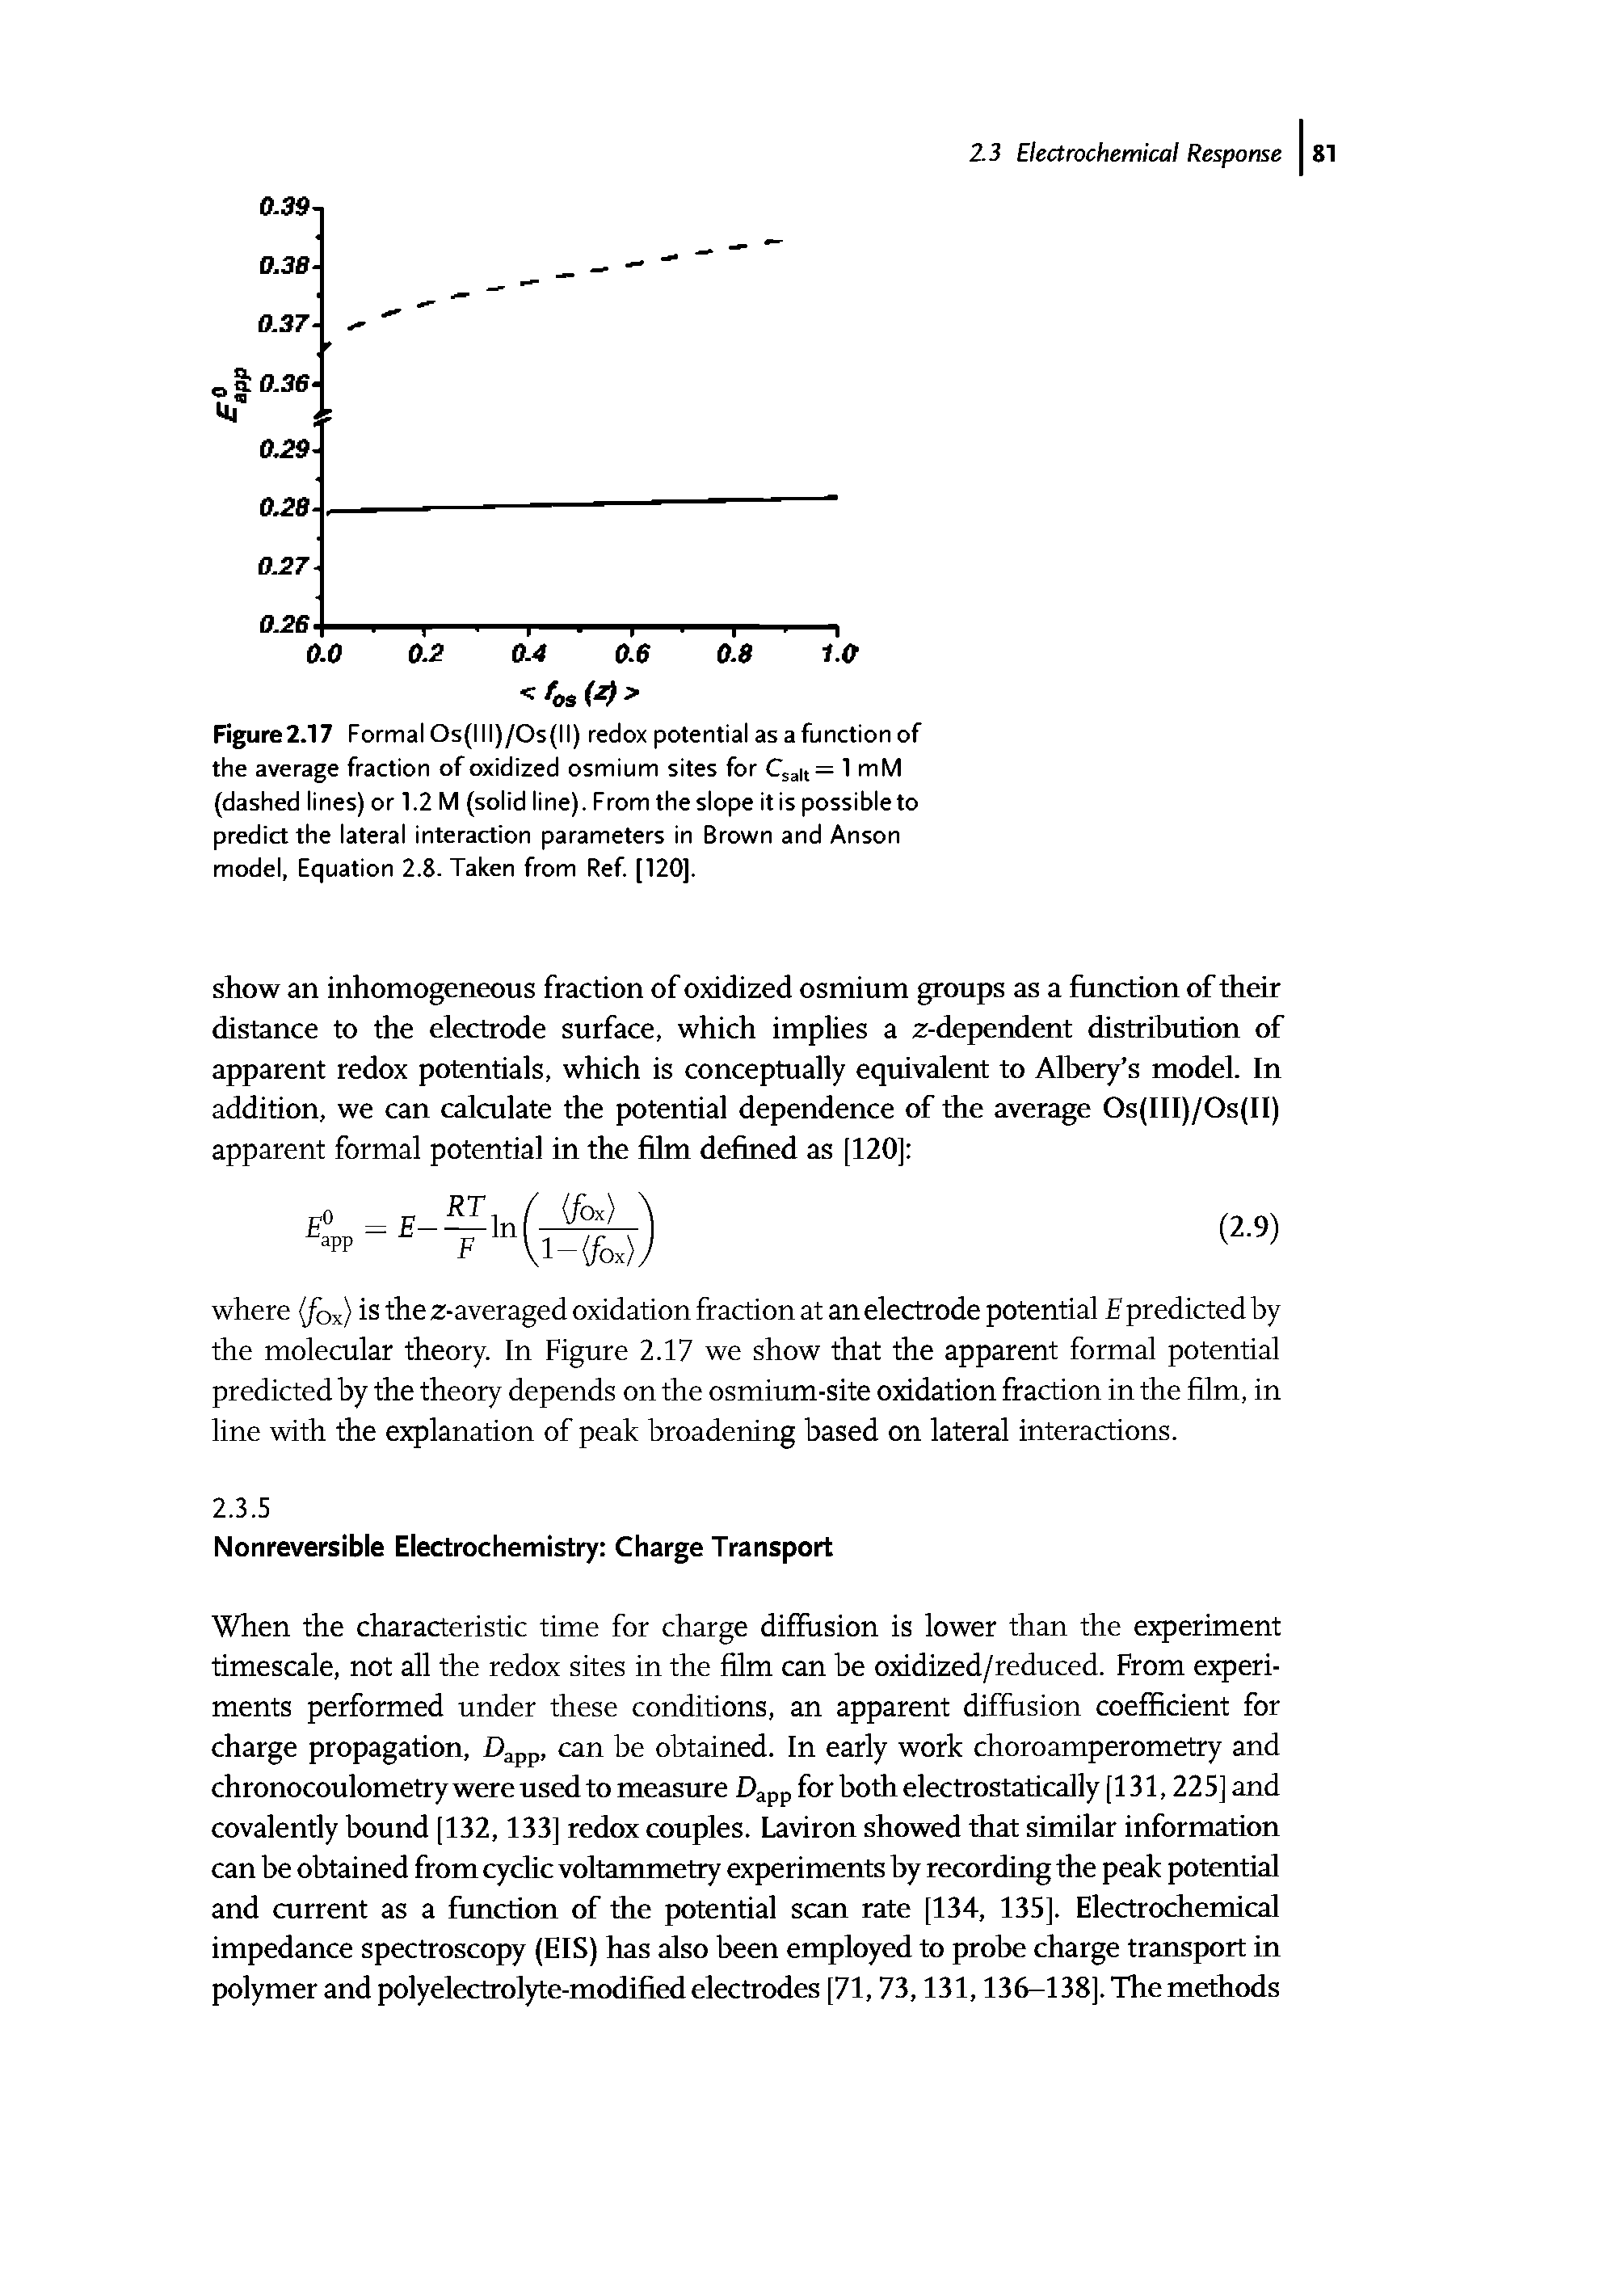 Figure2.17 Formal Os(lll)/Os(ll) redox potential as a function of the average fraction of oxidized osmium sites for Qai,= 1 mM (dashed lines) or 1.2 M (solid line). From the slope it is possible to predict the lateral interaction parameters in Brown and Anson model, Equation 2.8. Taken from Ref [120].